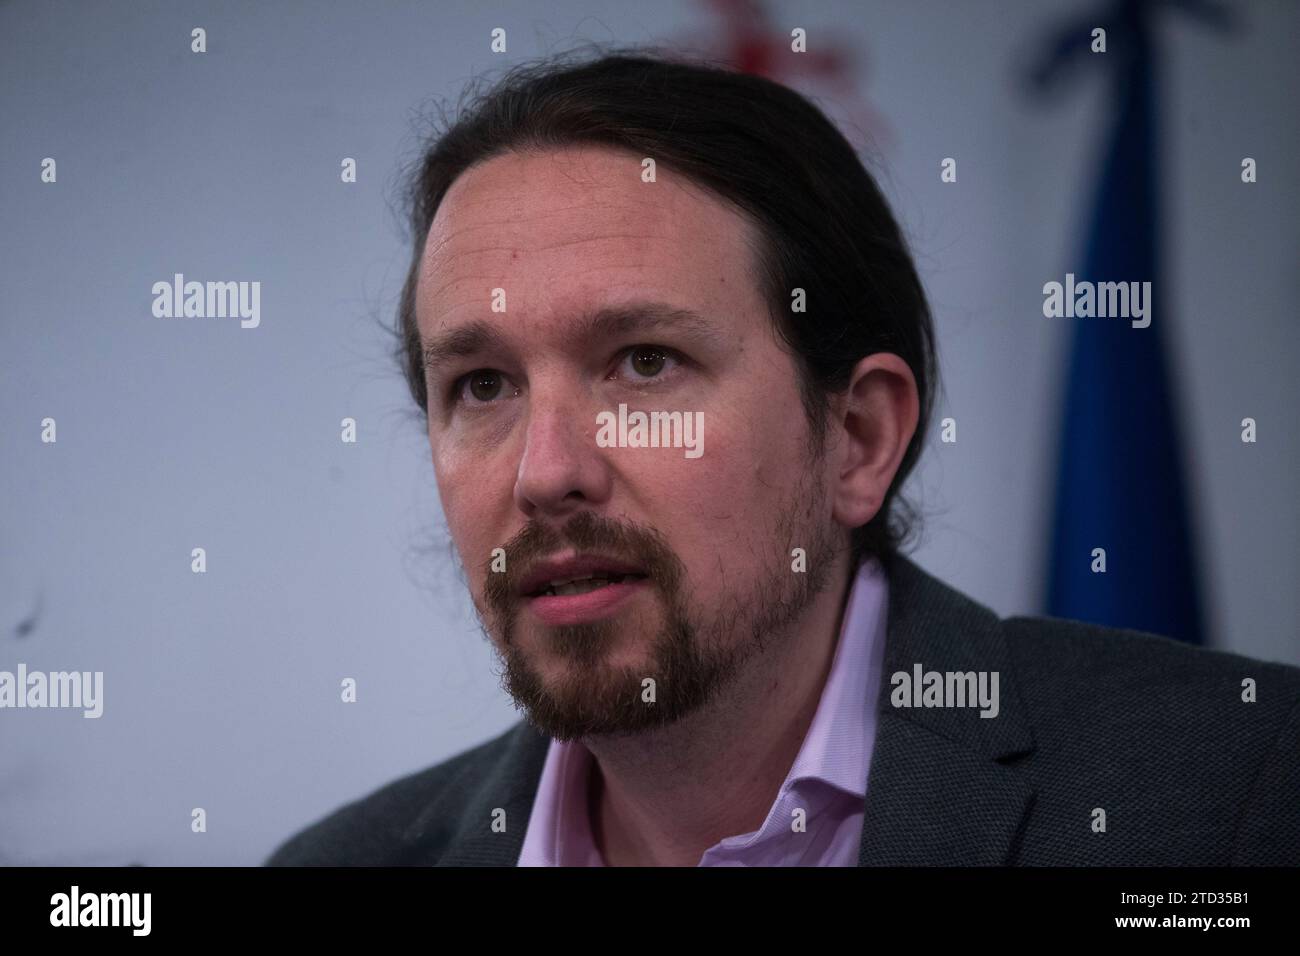 Madrid, 05/07/2019. Press conference by the leader of Unidas Podemos Pablo Iglesias at the Moncloa Palace after meeting with the President of the Government Pedro Sánchez. Photo: Ángel de Antonio archdc. Credit: Album / Archivo ABC / Ángel de Antonio Stock Photo